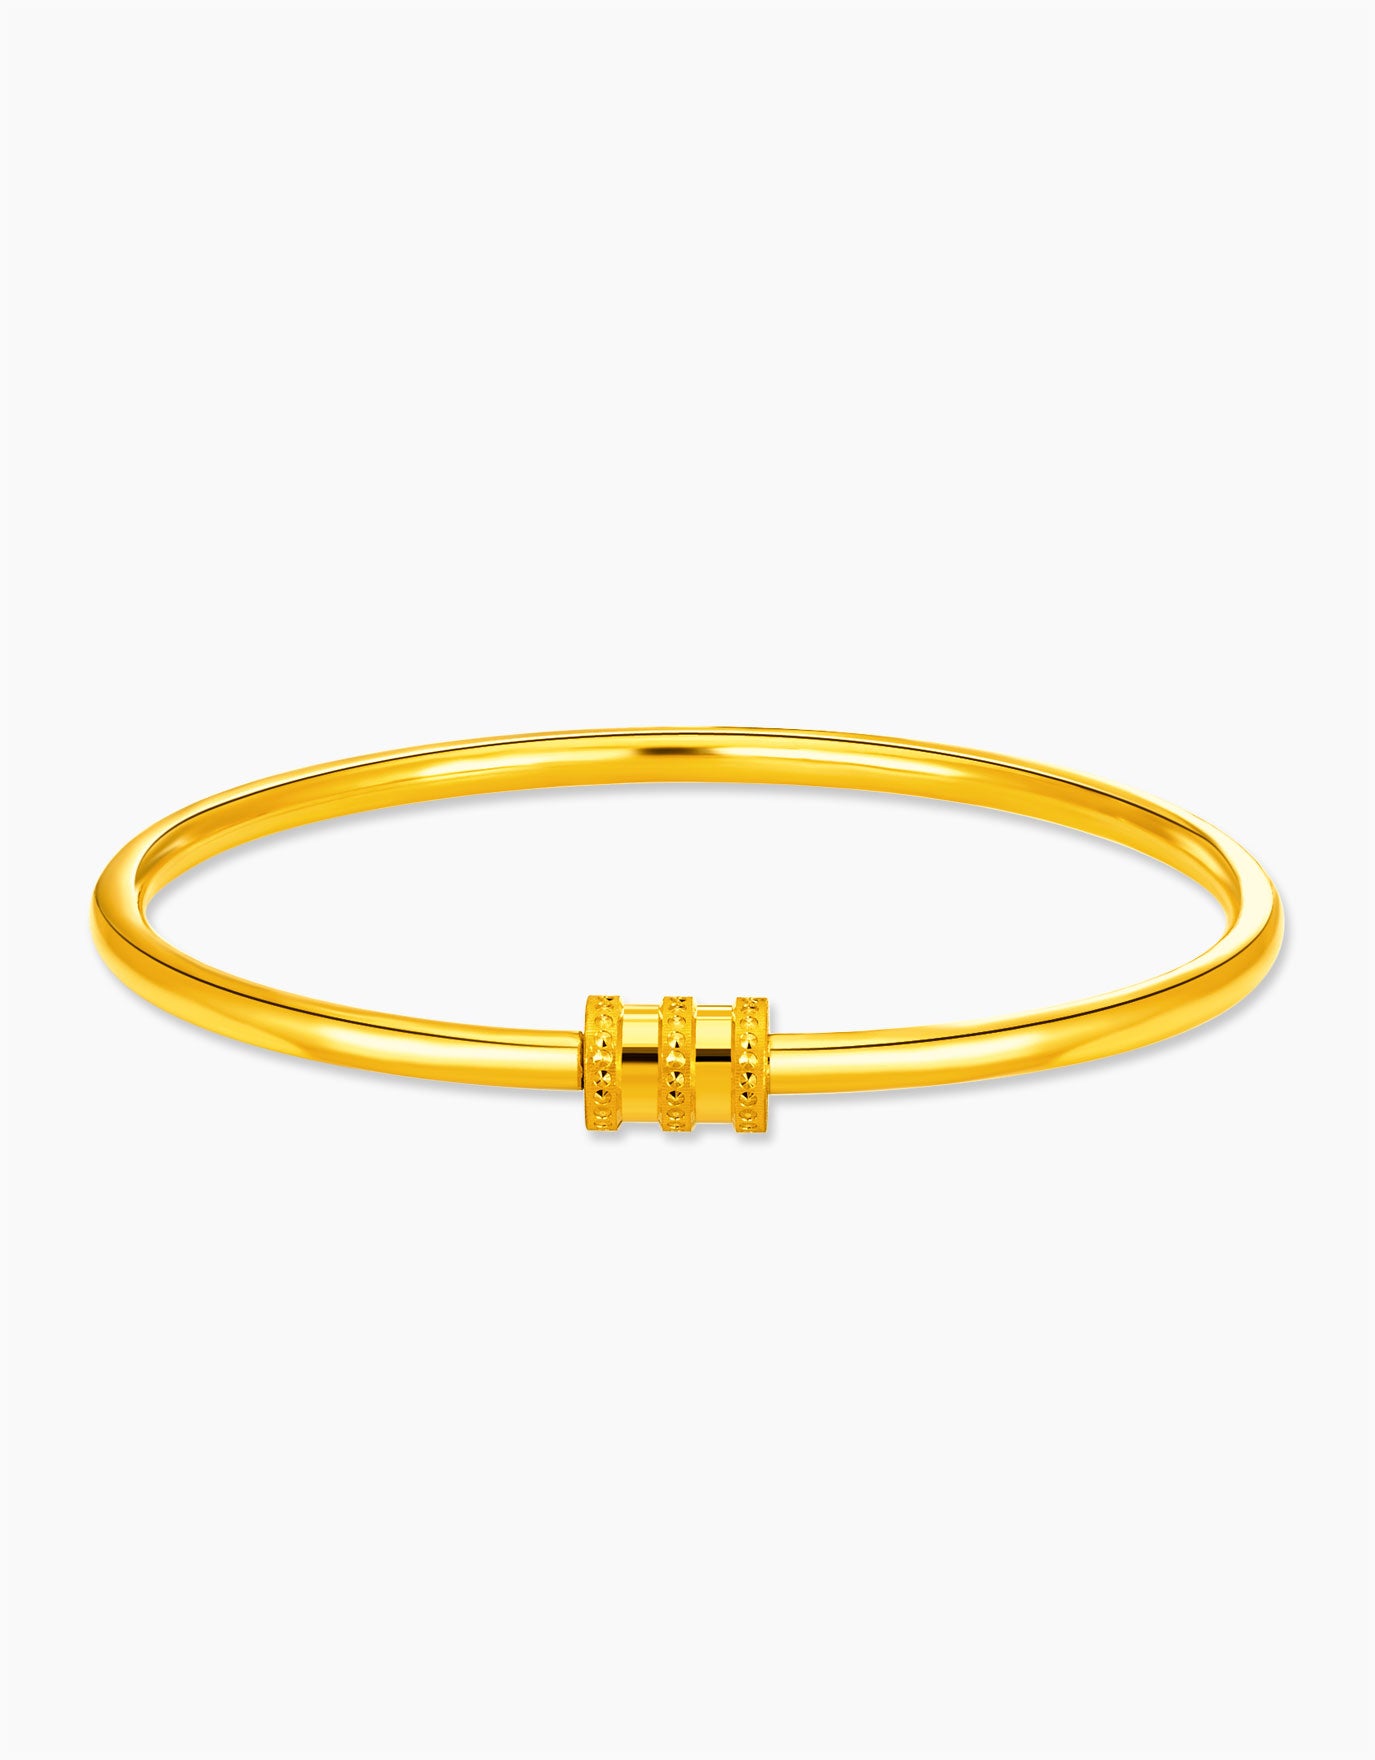 LVC 9IN Drum 999 Gold Bangle